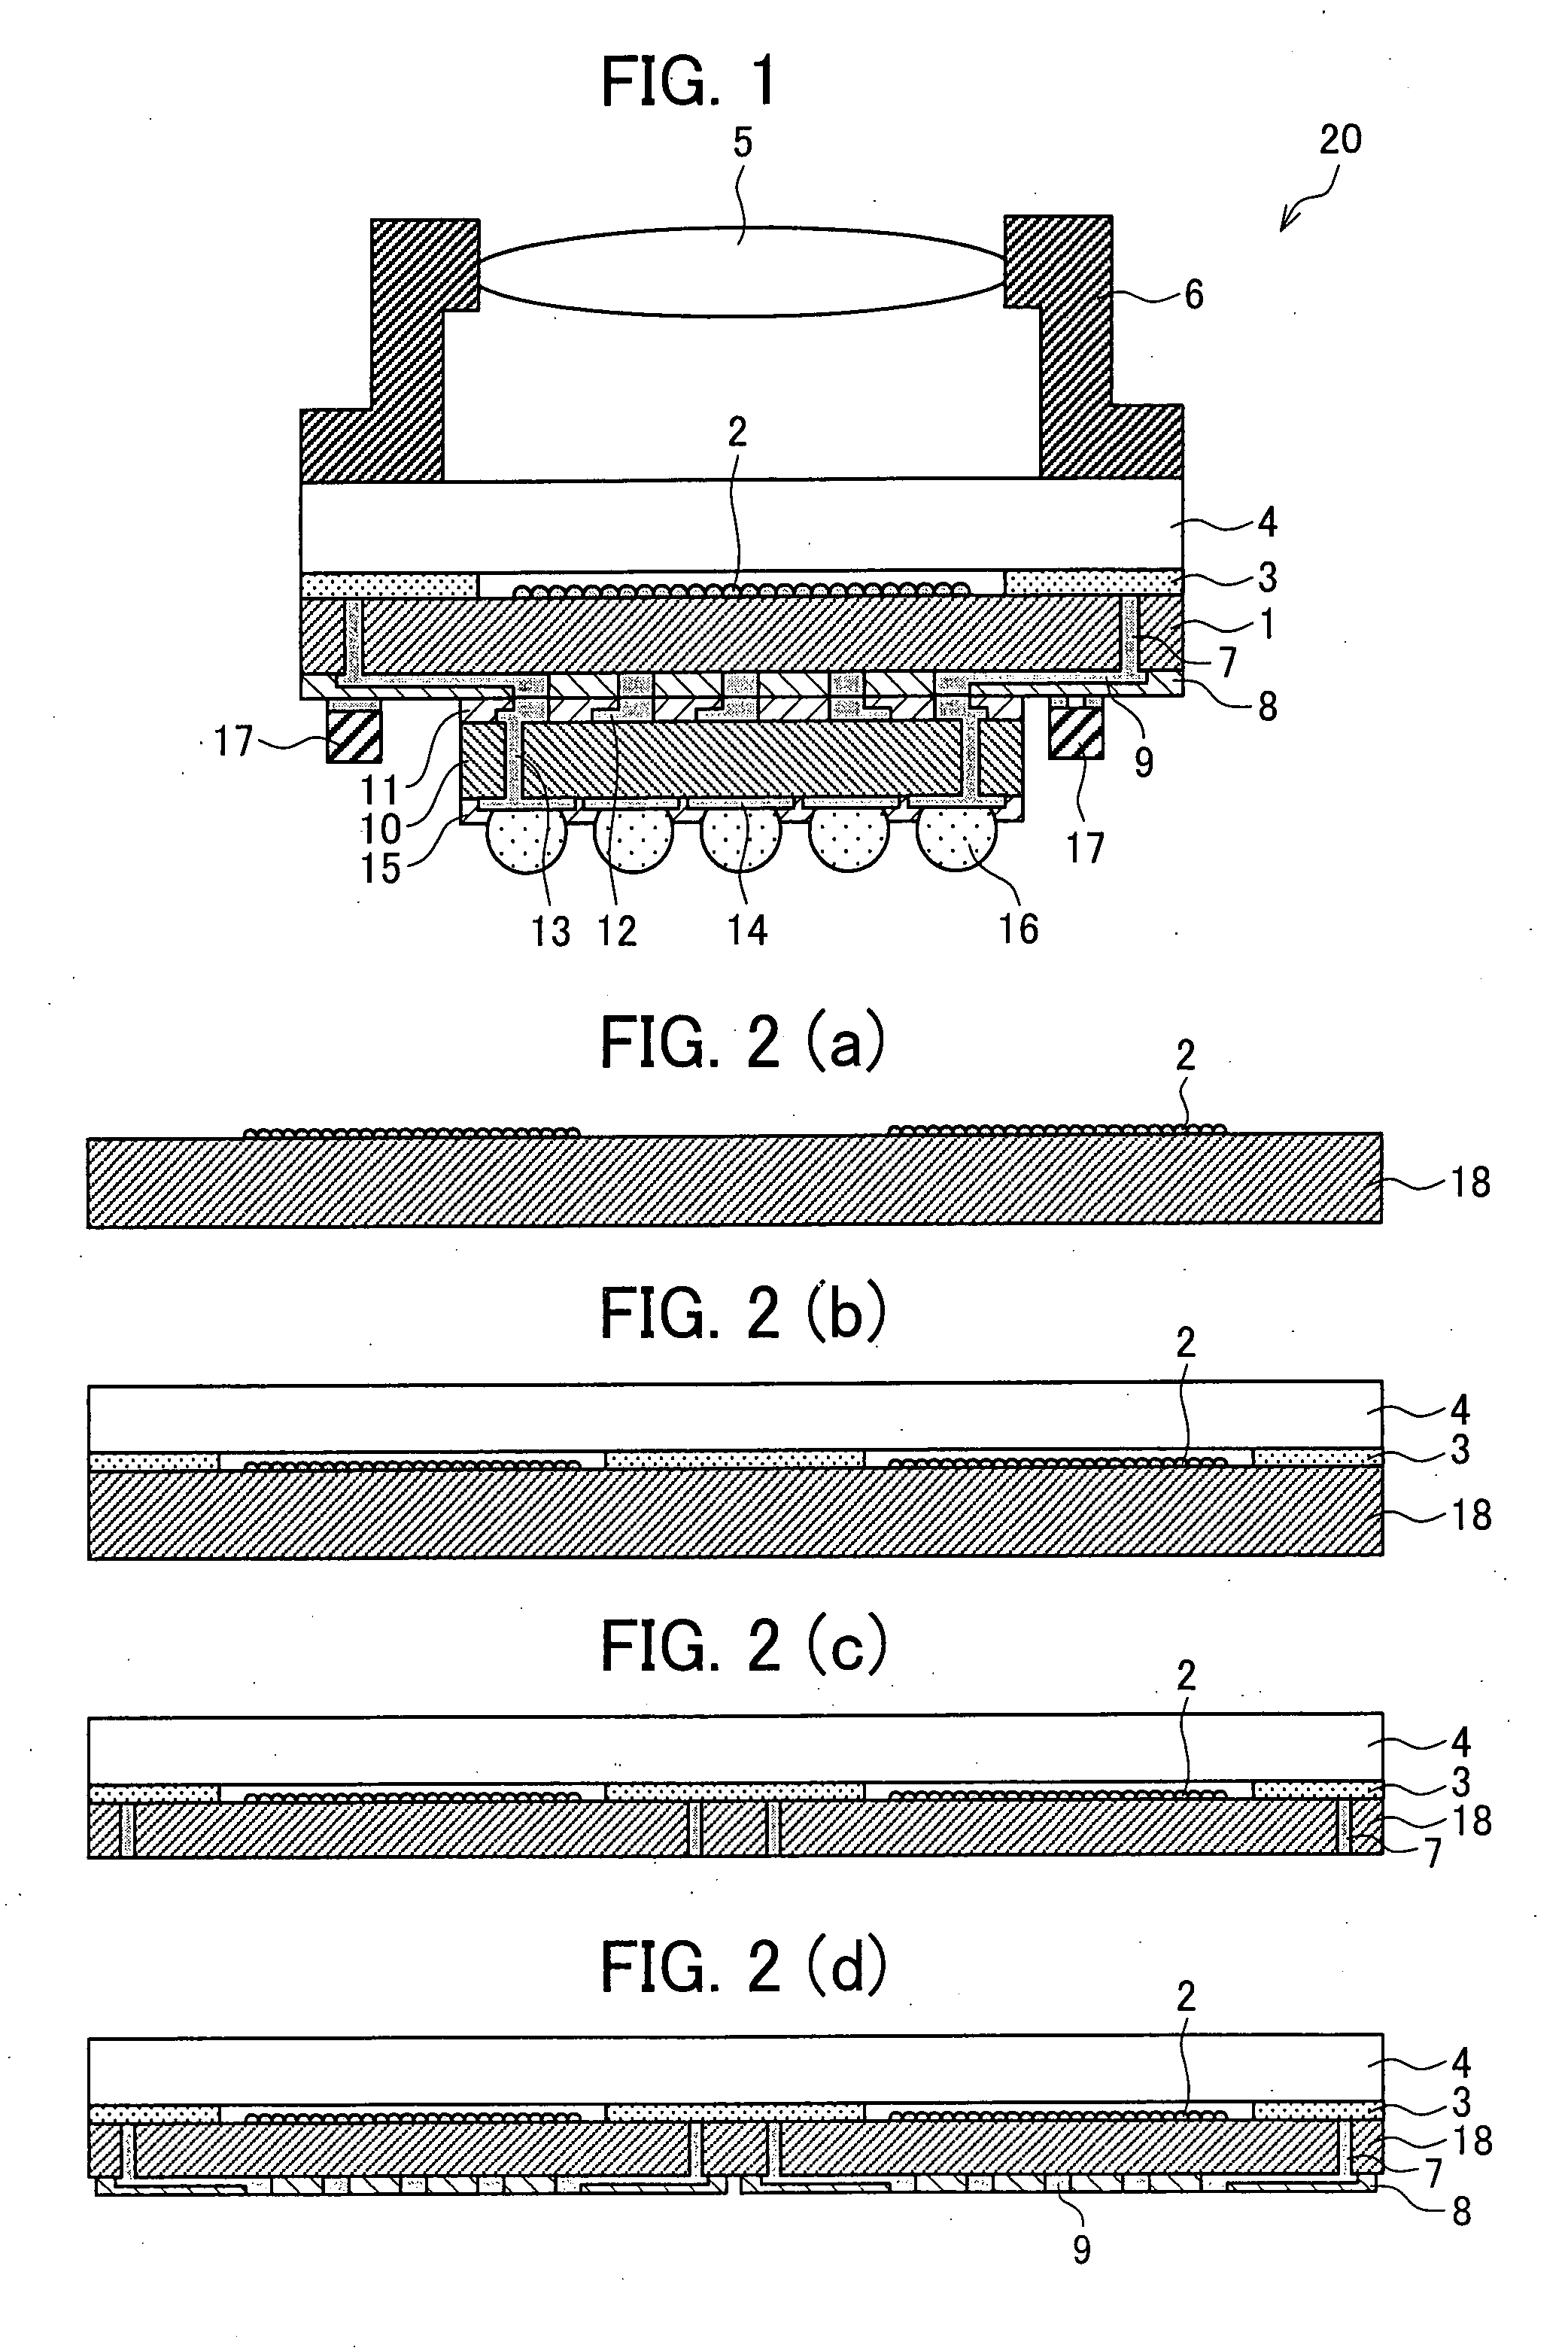 Module for optical apparatus and method of producing module for optical apparatus